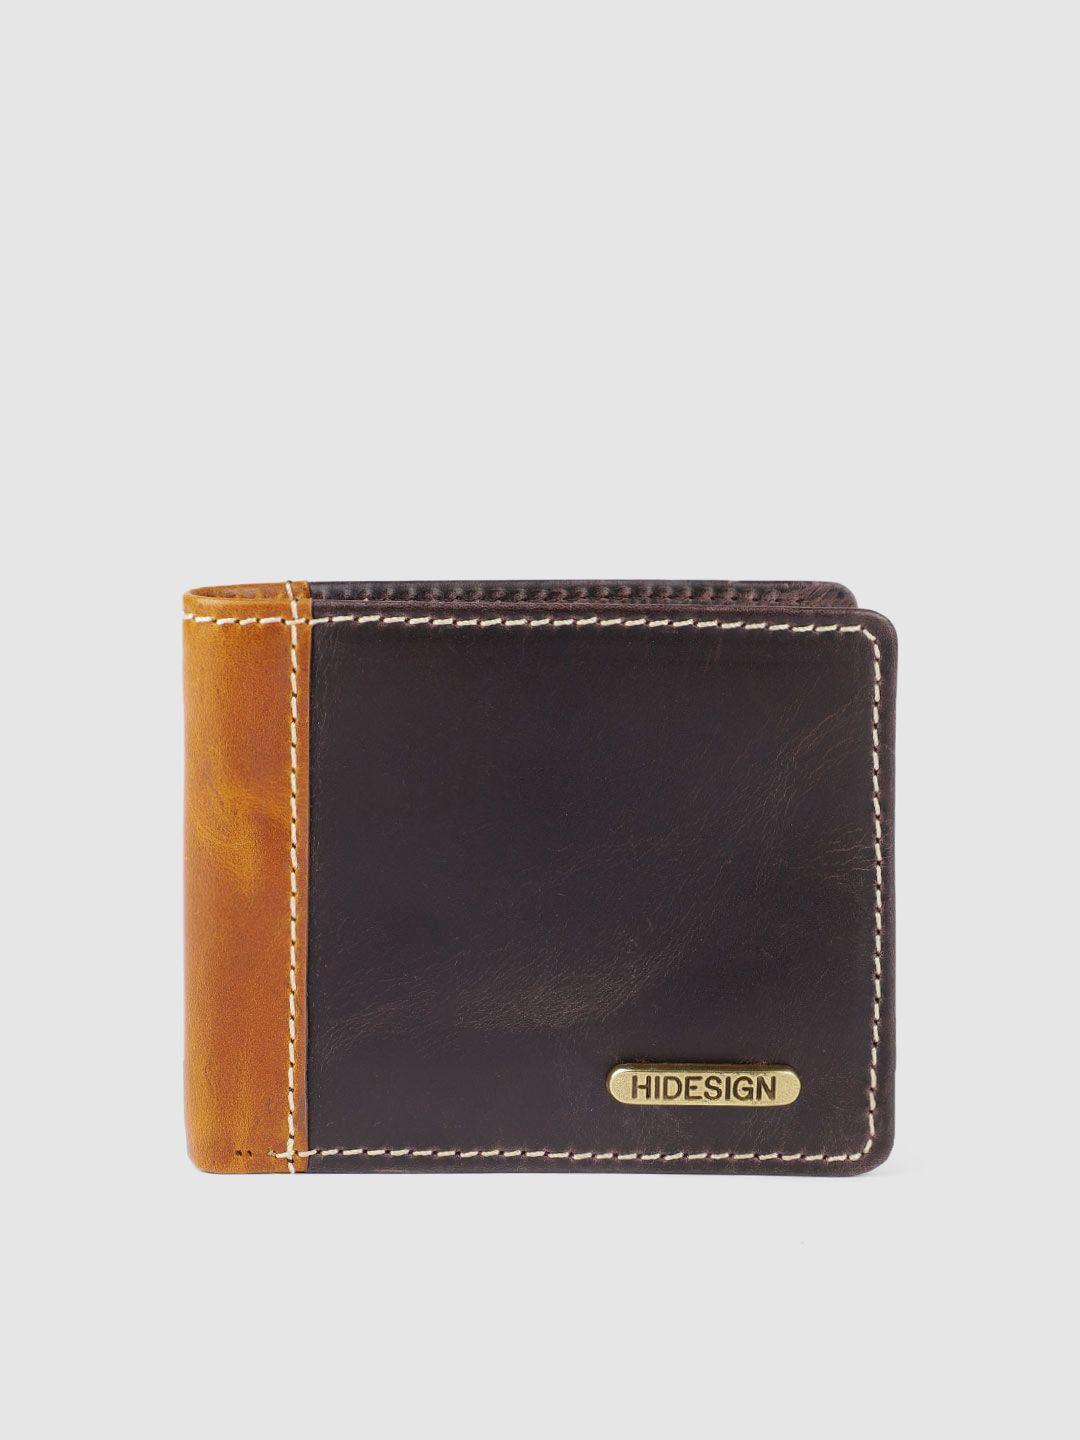 hidesign men brown leather two fold wallet